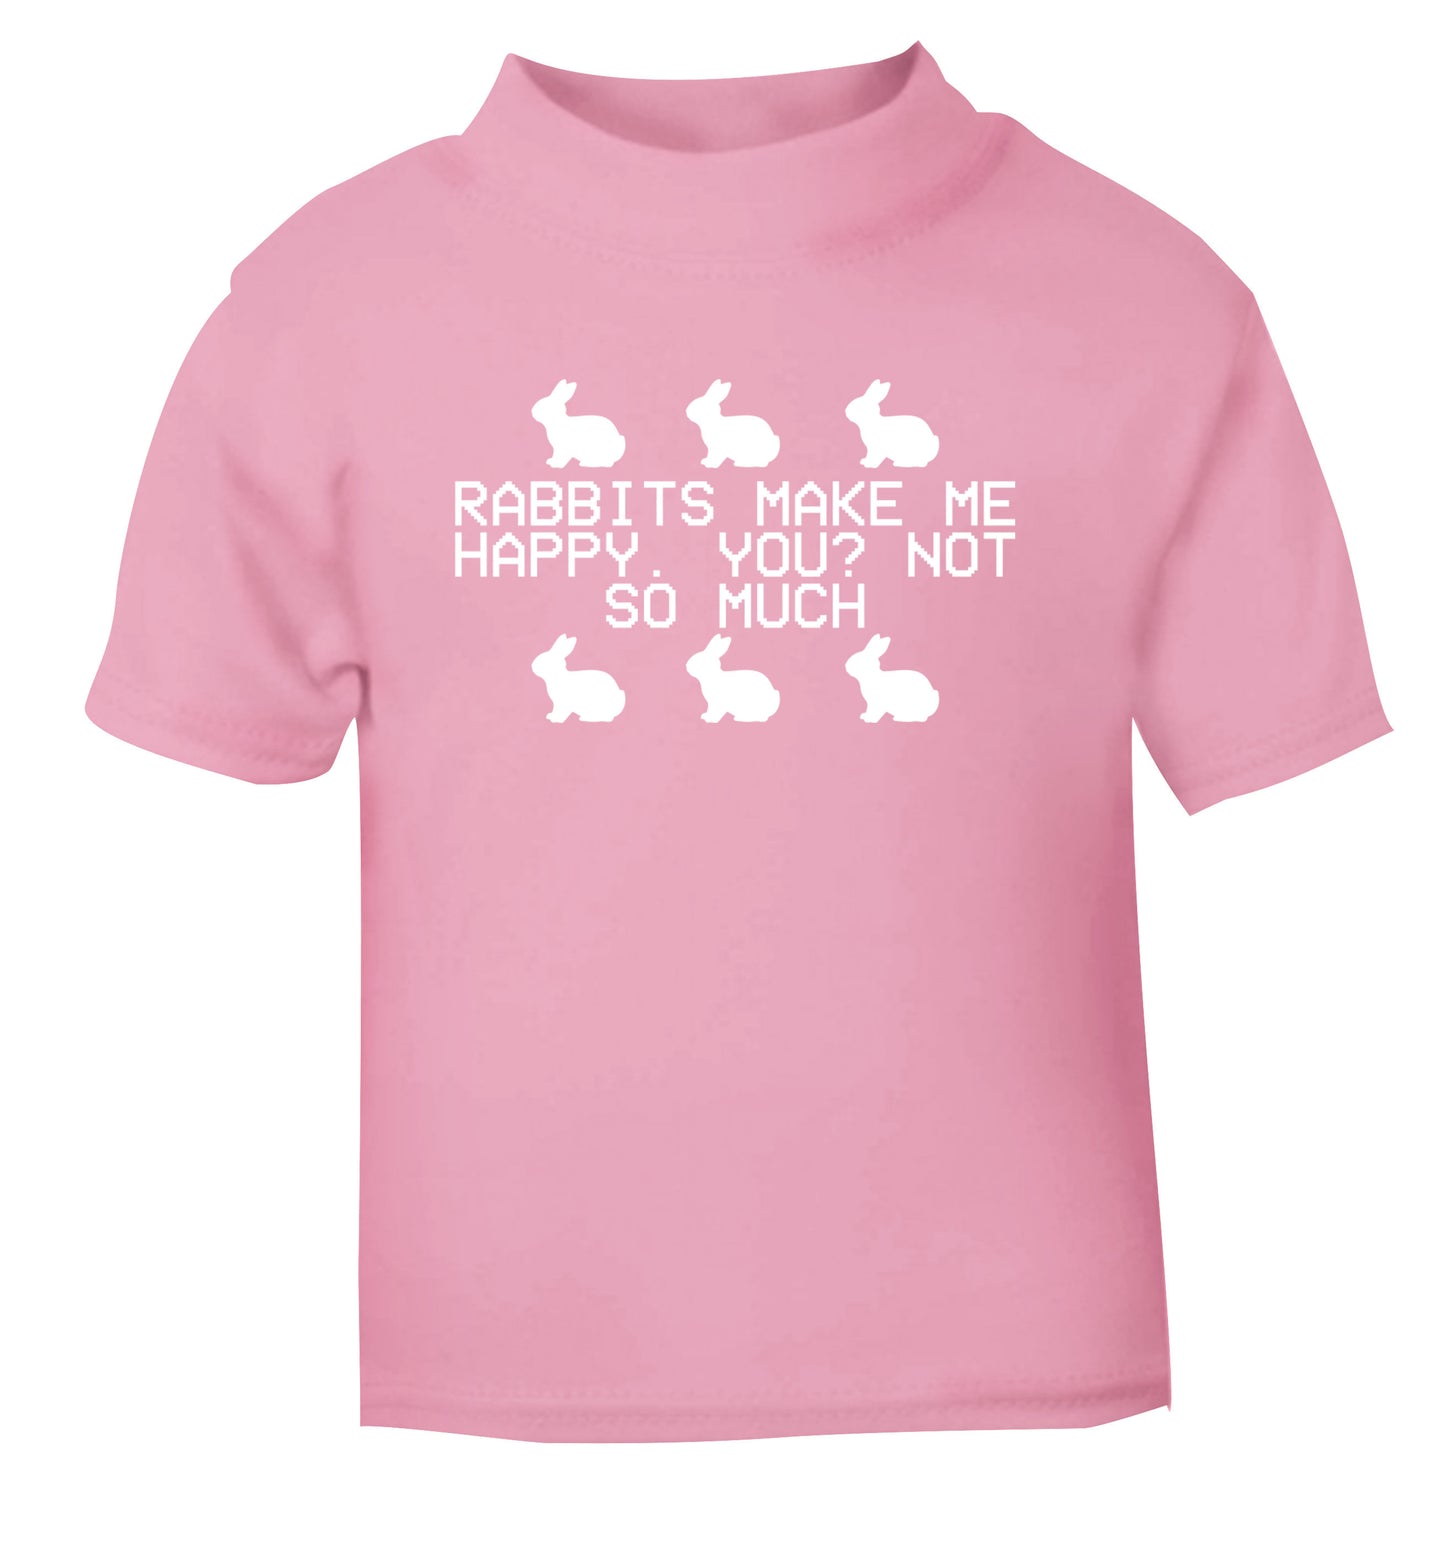 Rabbits make me happy, you not so much light pink Baby Toddler Tshirt 2 Years